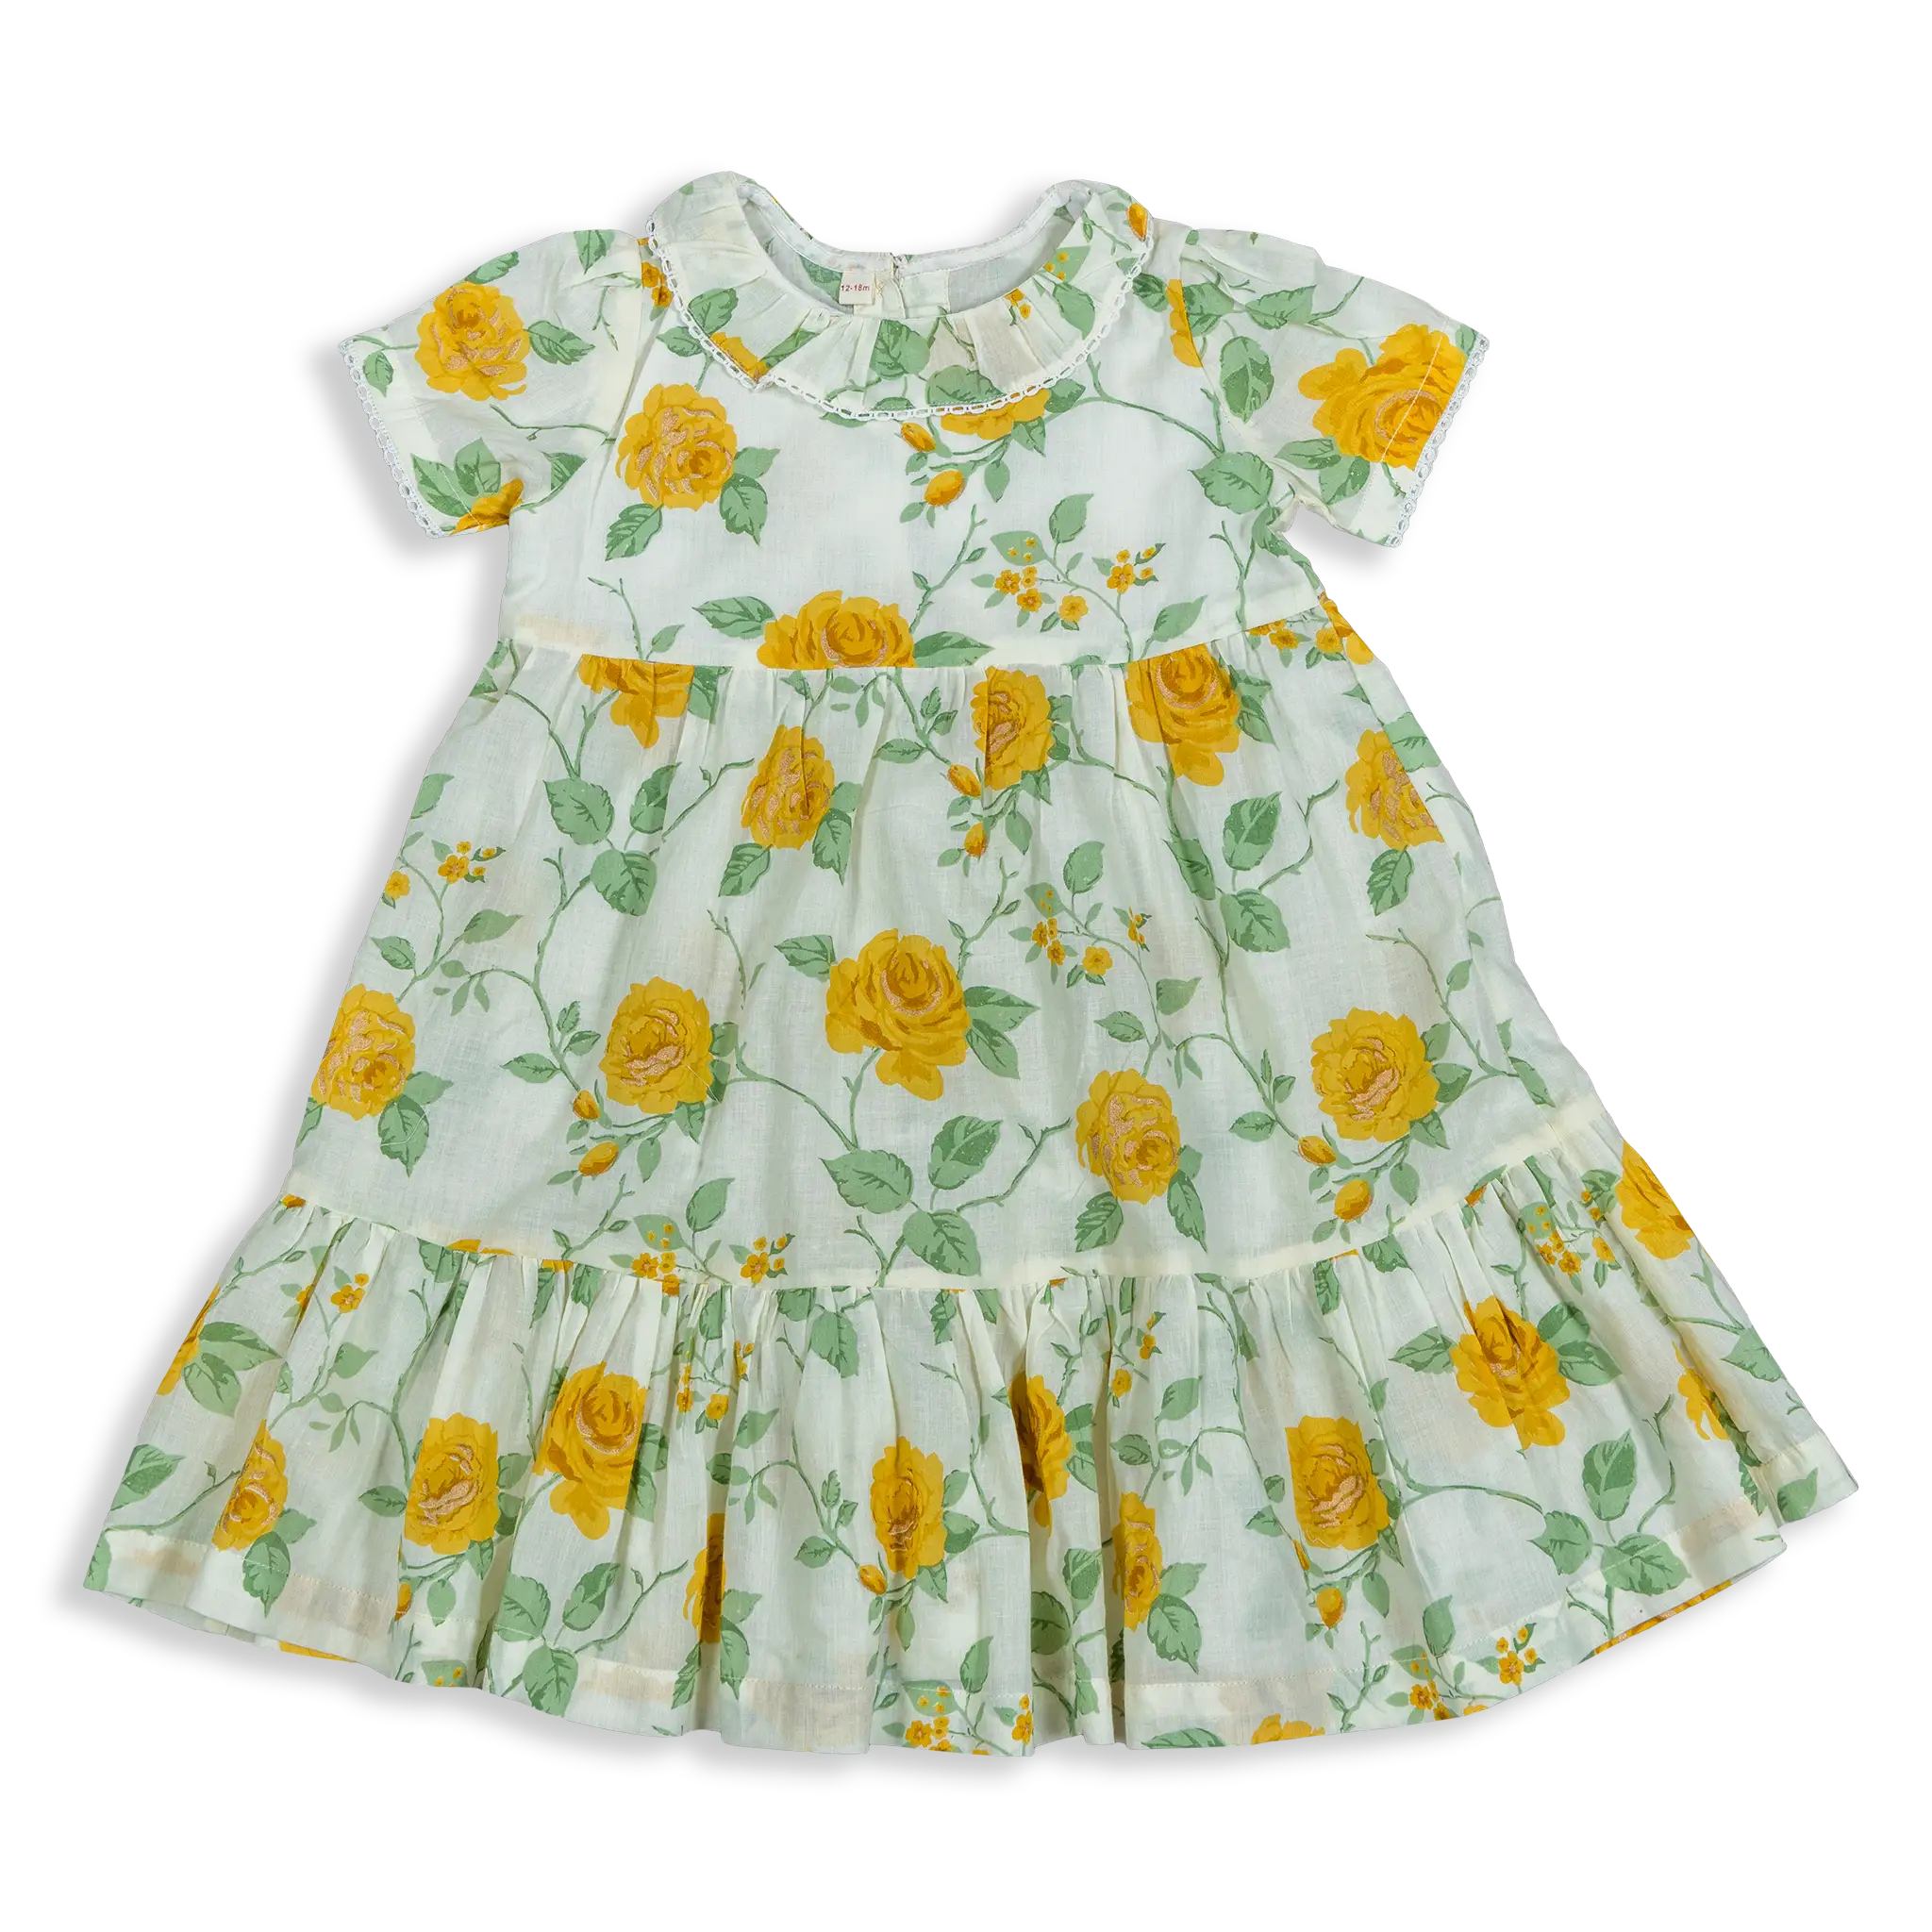 Introducing our Classic Rose print 100% Cotton dress for little girls, a delightful and timeless piece that will make your little one shine. Crafted from high-quality cotton, this dress offers a soft and gentle feel against the skin, ensuring utmost comfort for your child.